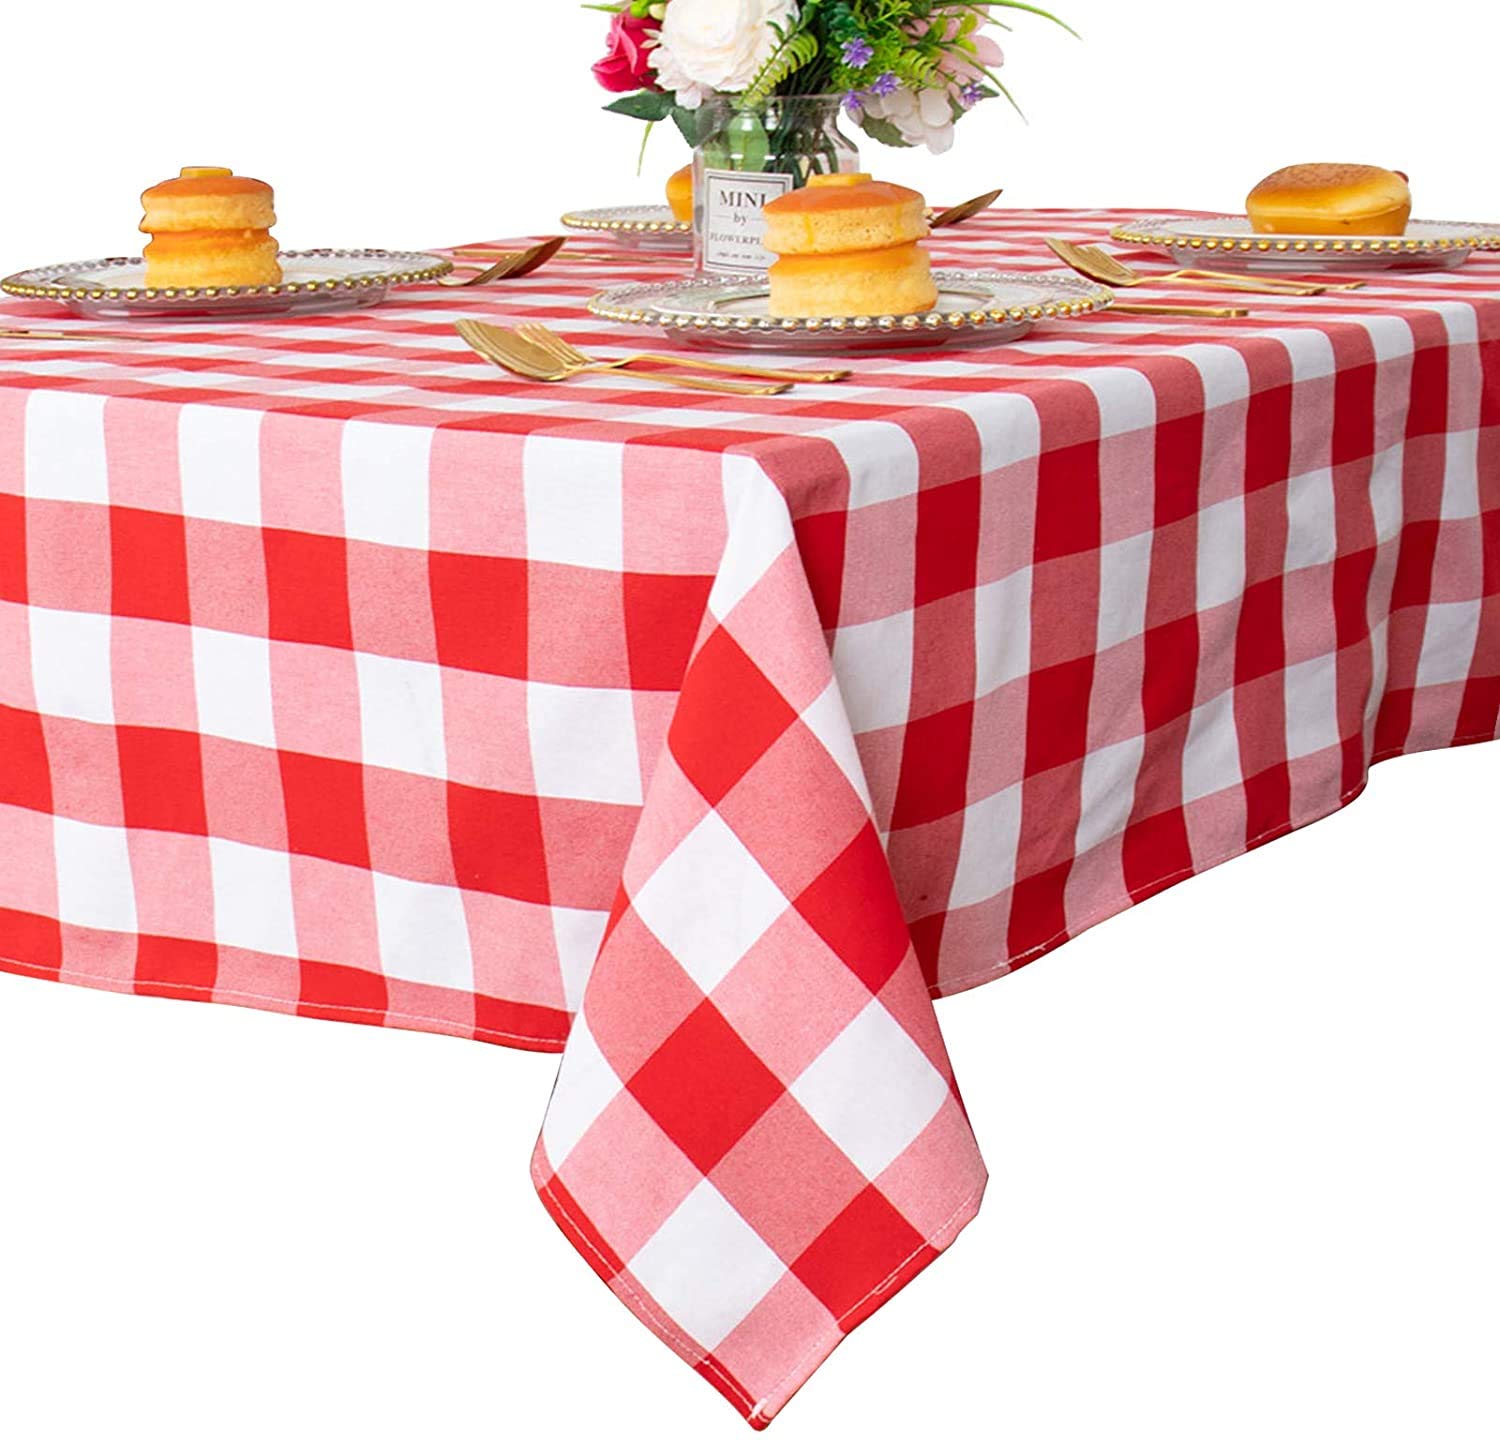 Red and White Checked Tablecloth 55"x55" Square Table Cloths Plaid Tablecloth Party Camping Table Cover with Checked Plaid Pattern Rustic Country Style Checked Table Linen (55"x55", Red and White)